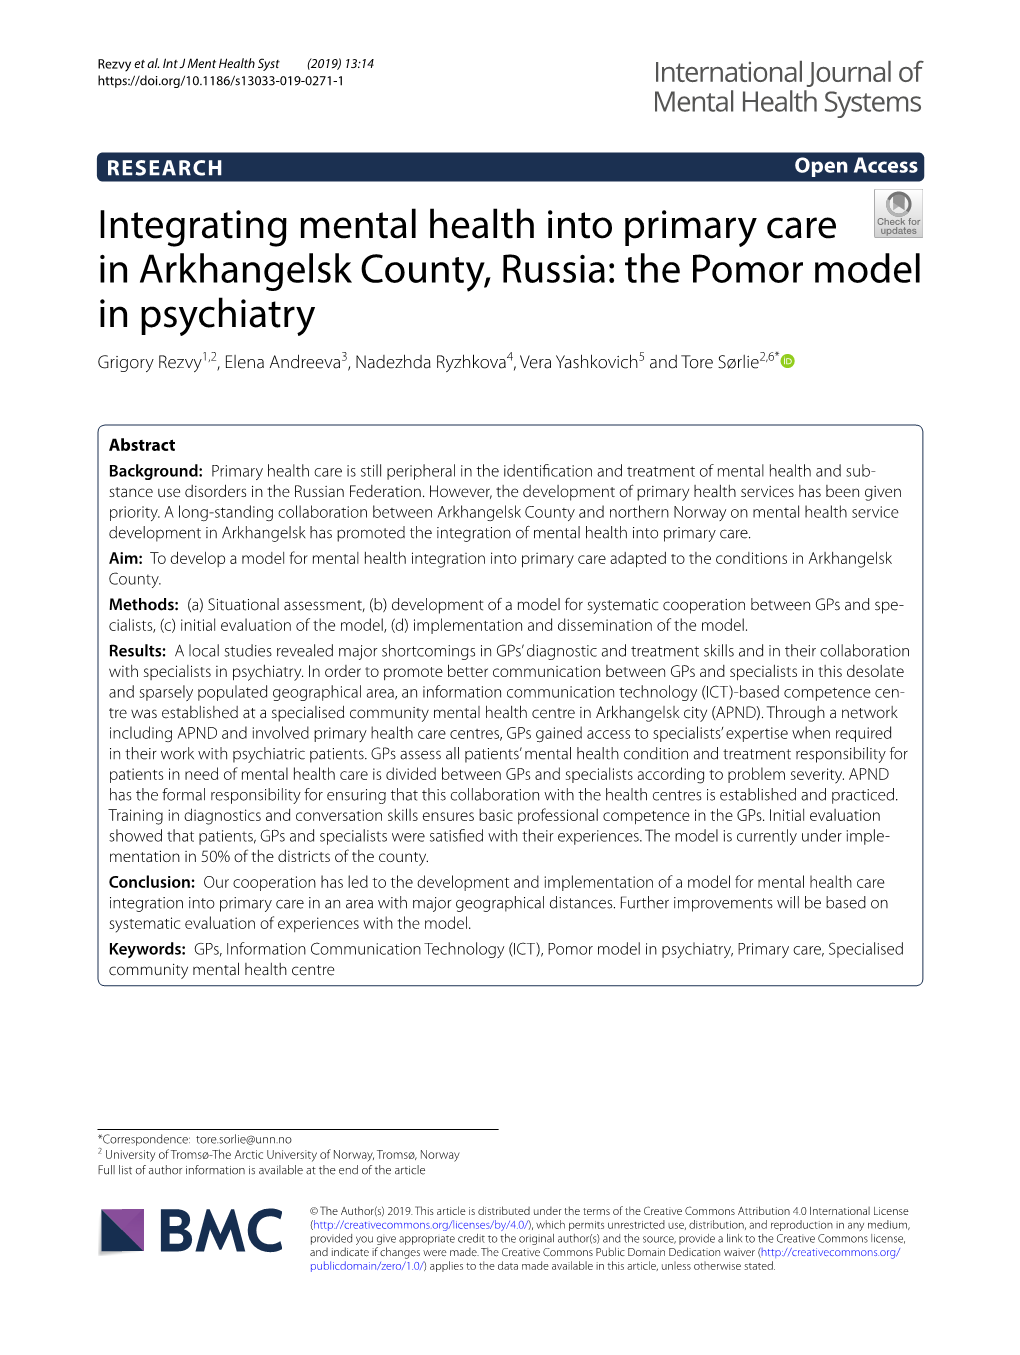 Integrating Mental Health Into Primary Care in Arkhangelsk County, Russia: the Pomor Model in Psychiatry